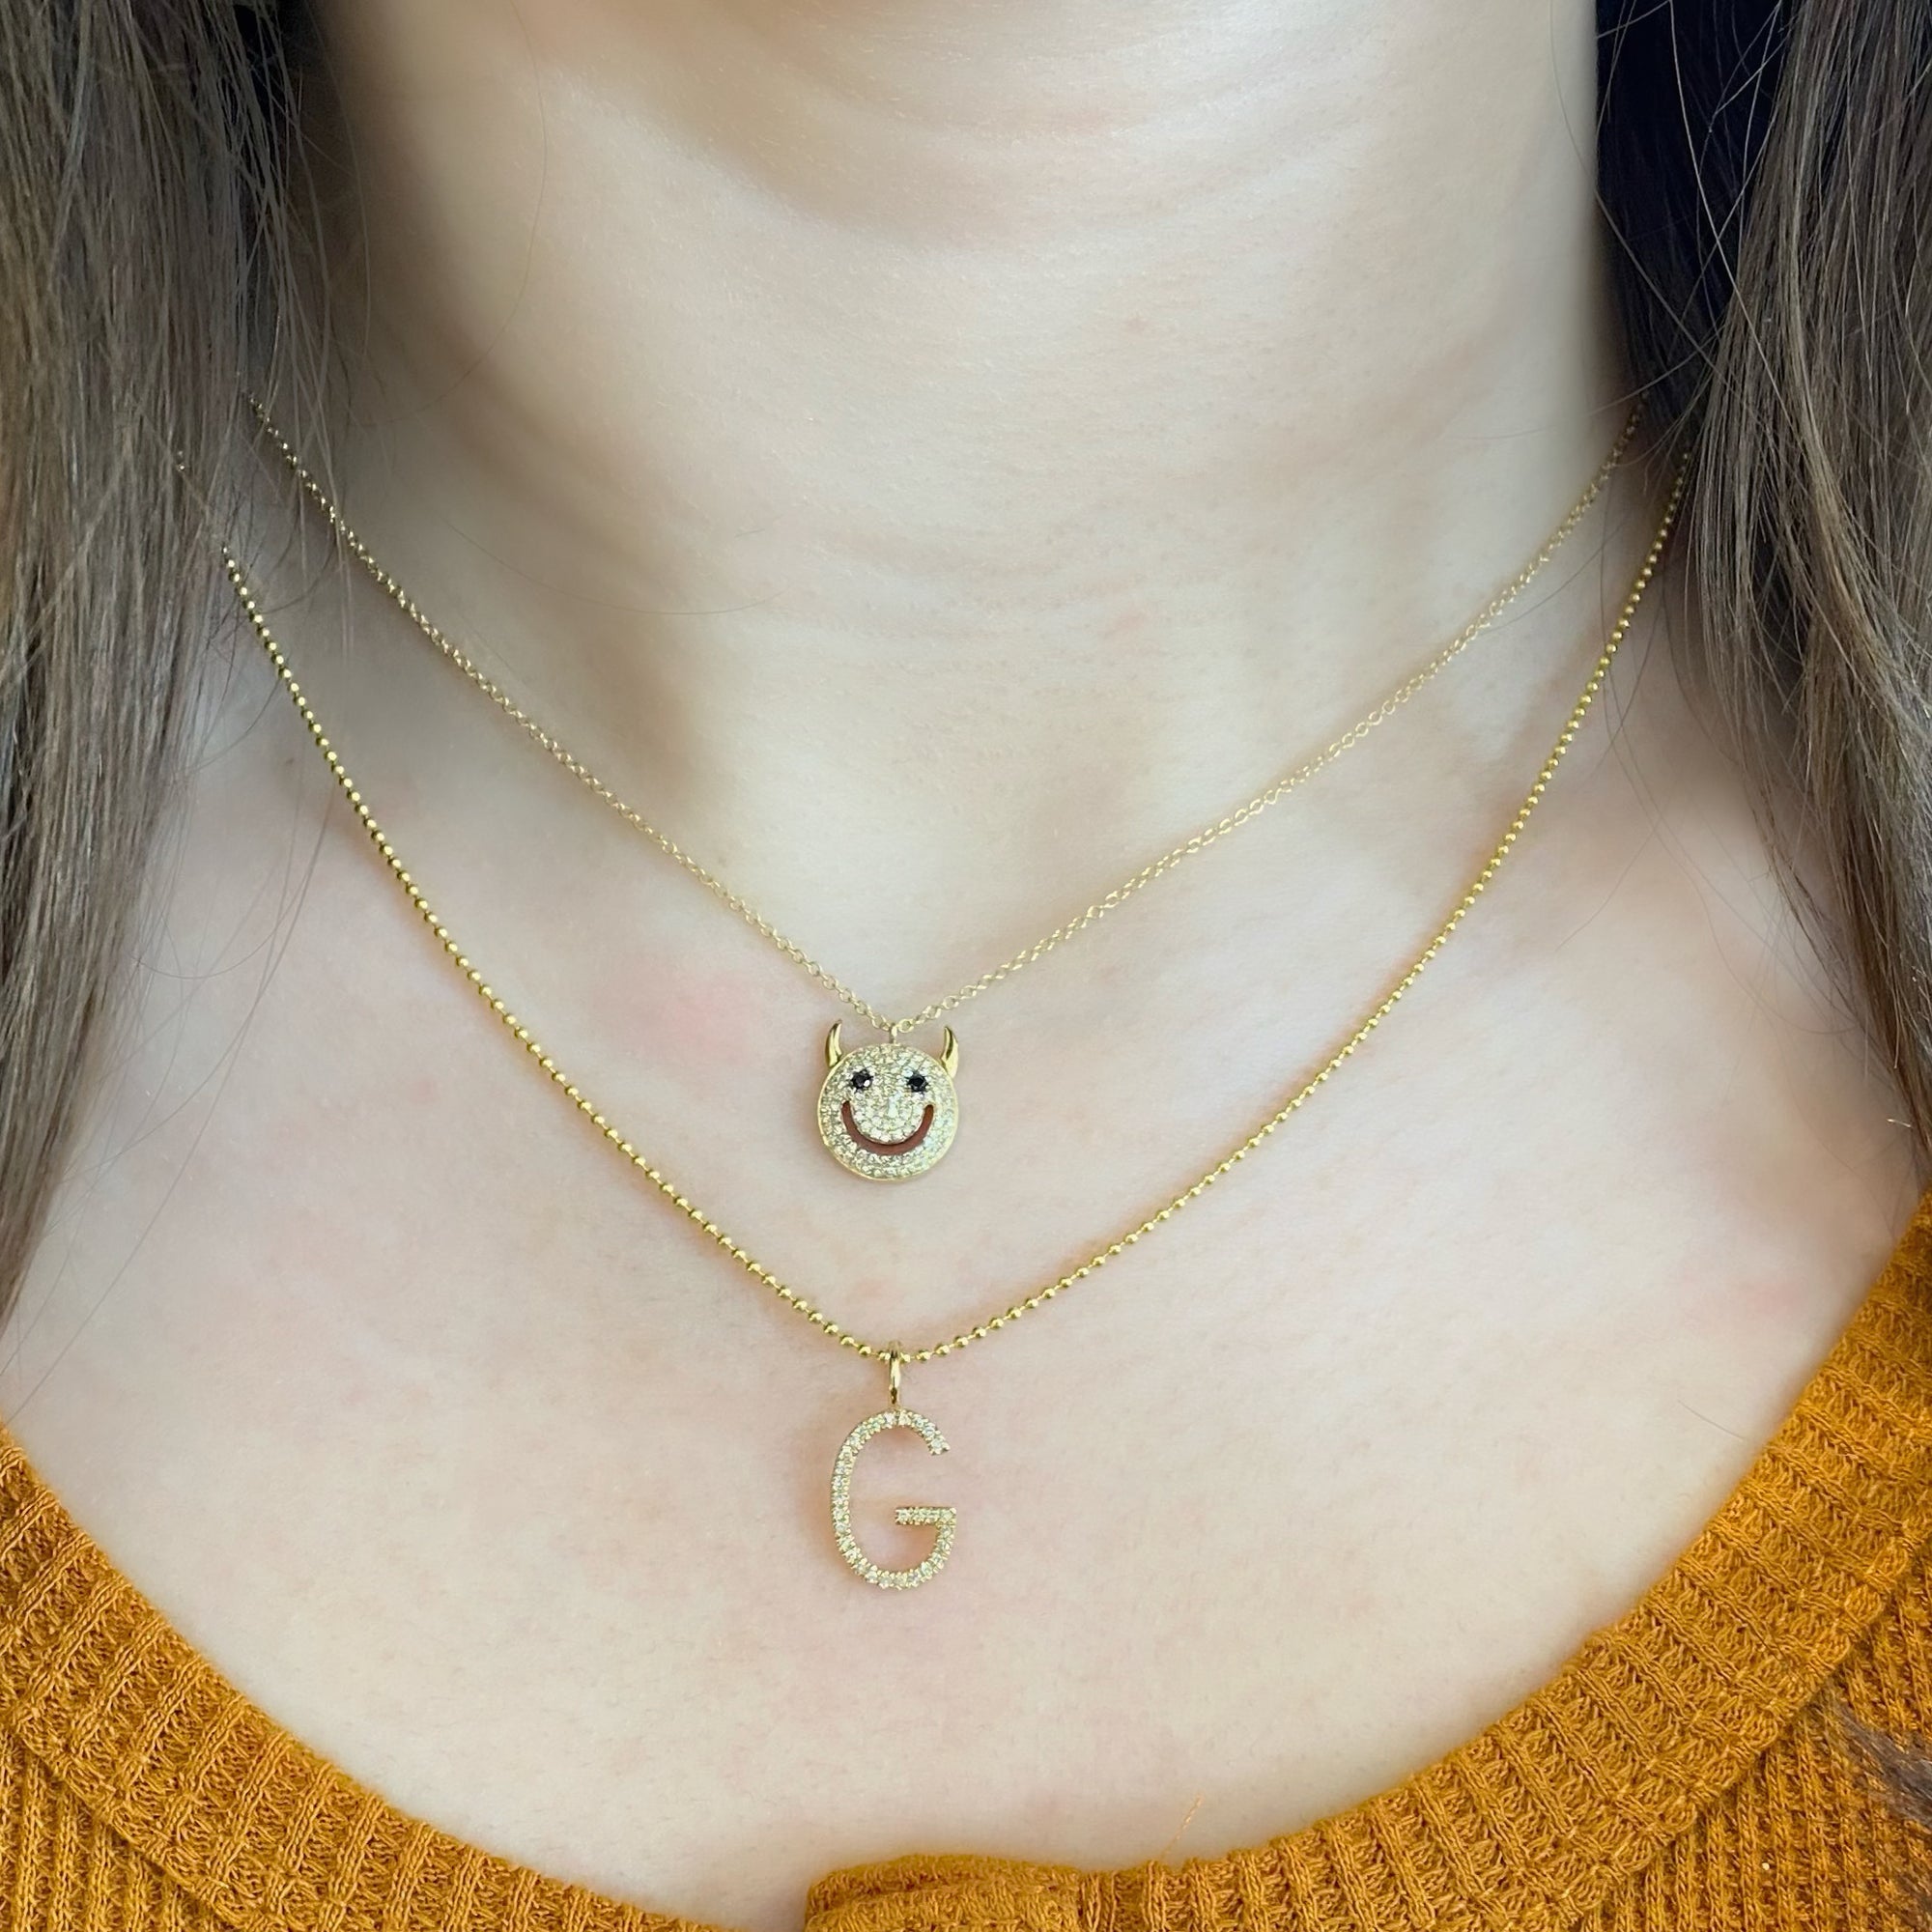 Solid 14k yellow gold weighing 2.51 grams with 96 round diamonds weighing .21 carats and 2 black round diamonds weighing .03 carats Devil Smiley Face Pendant Necklace | Nuha Jewelers